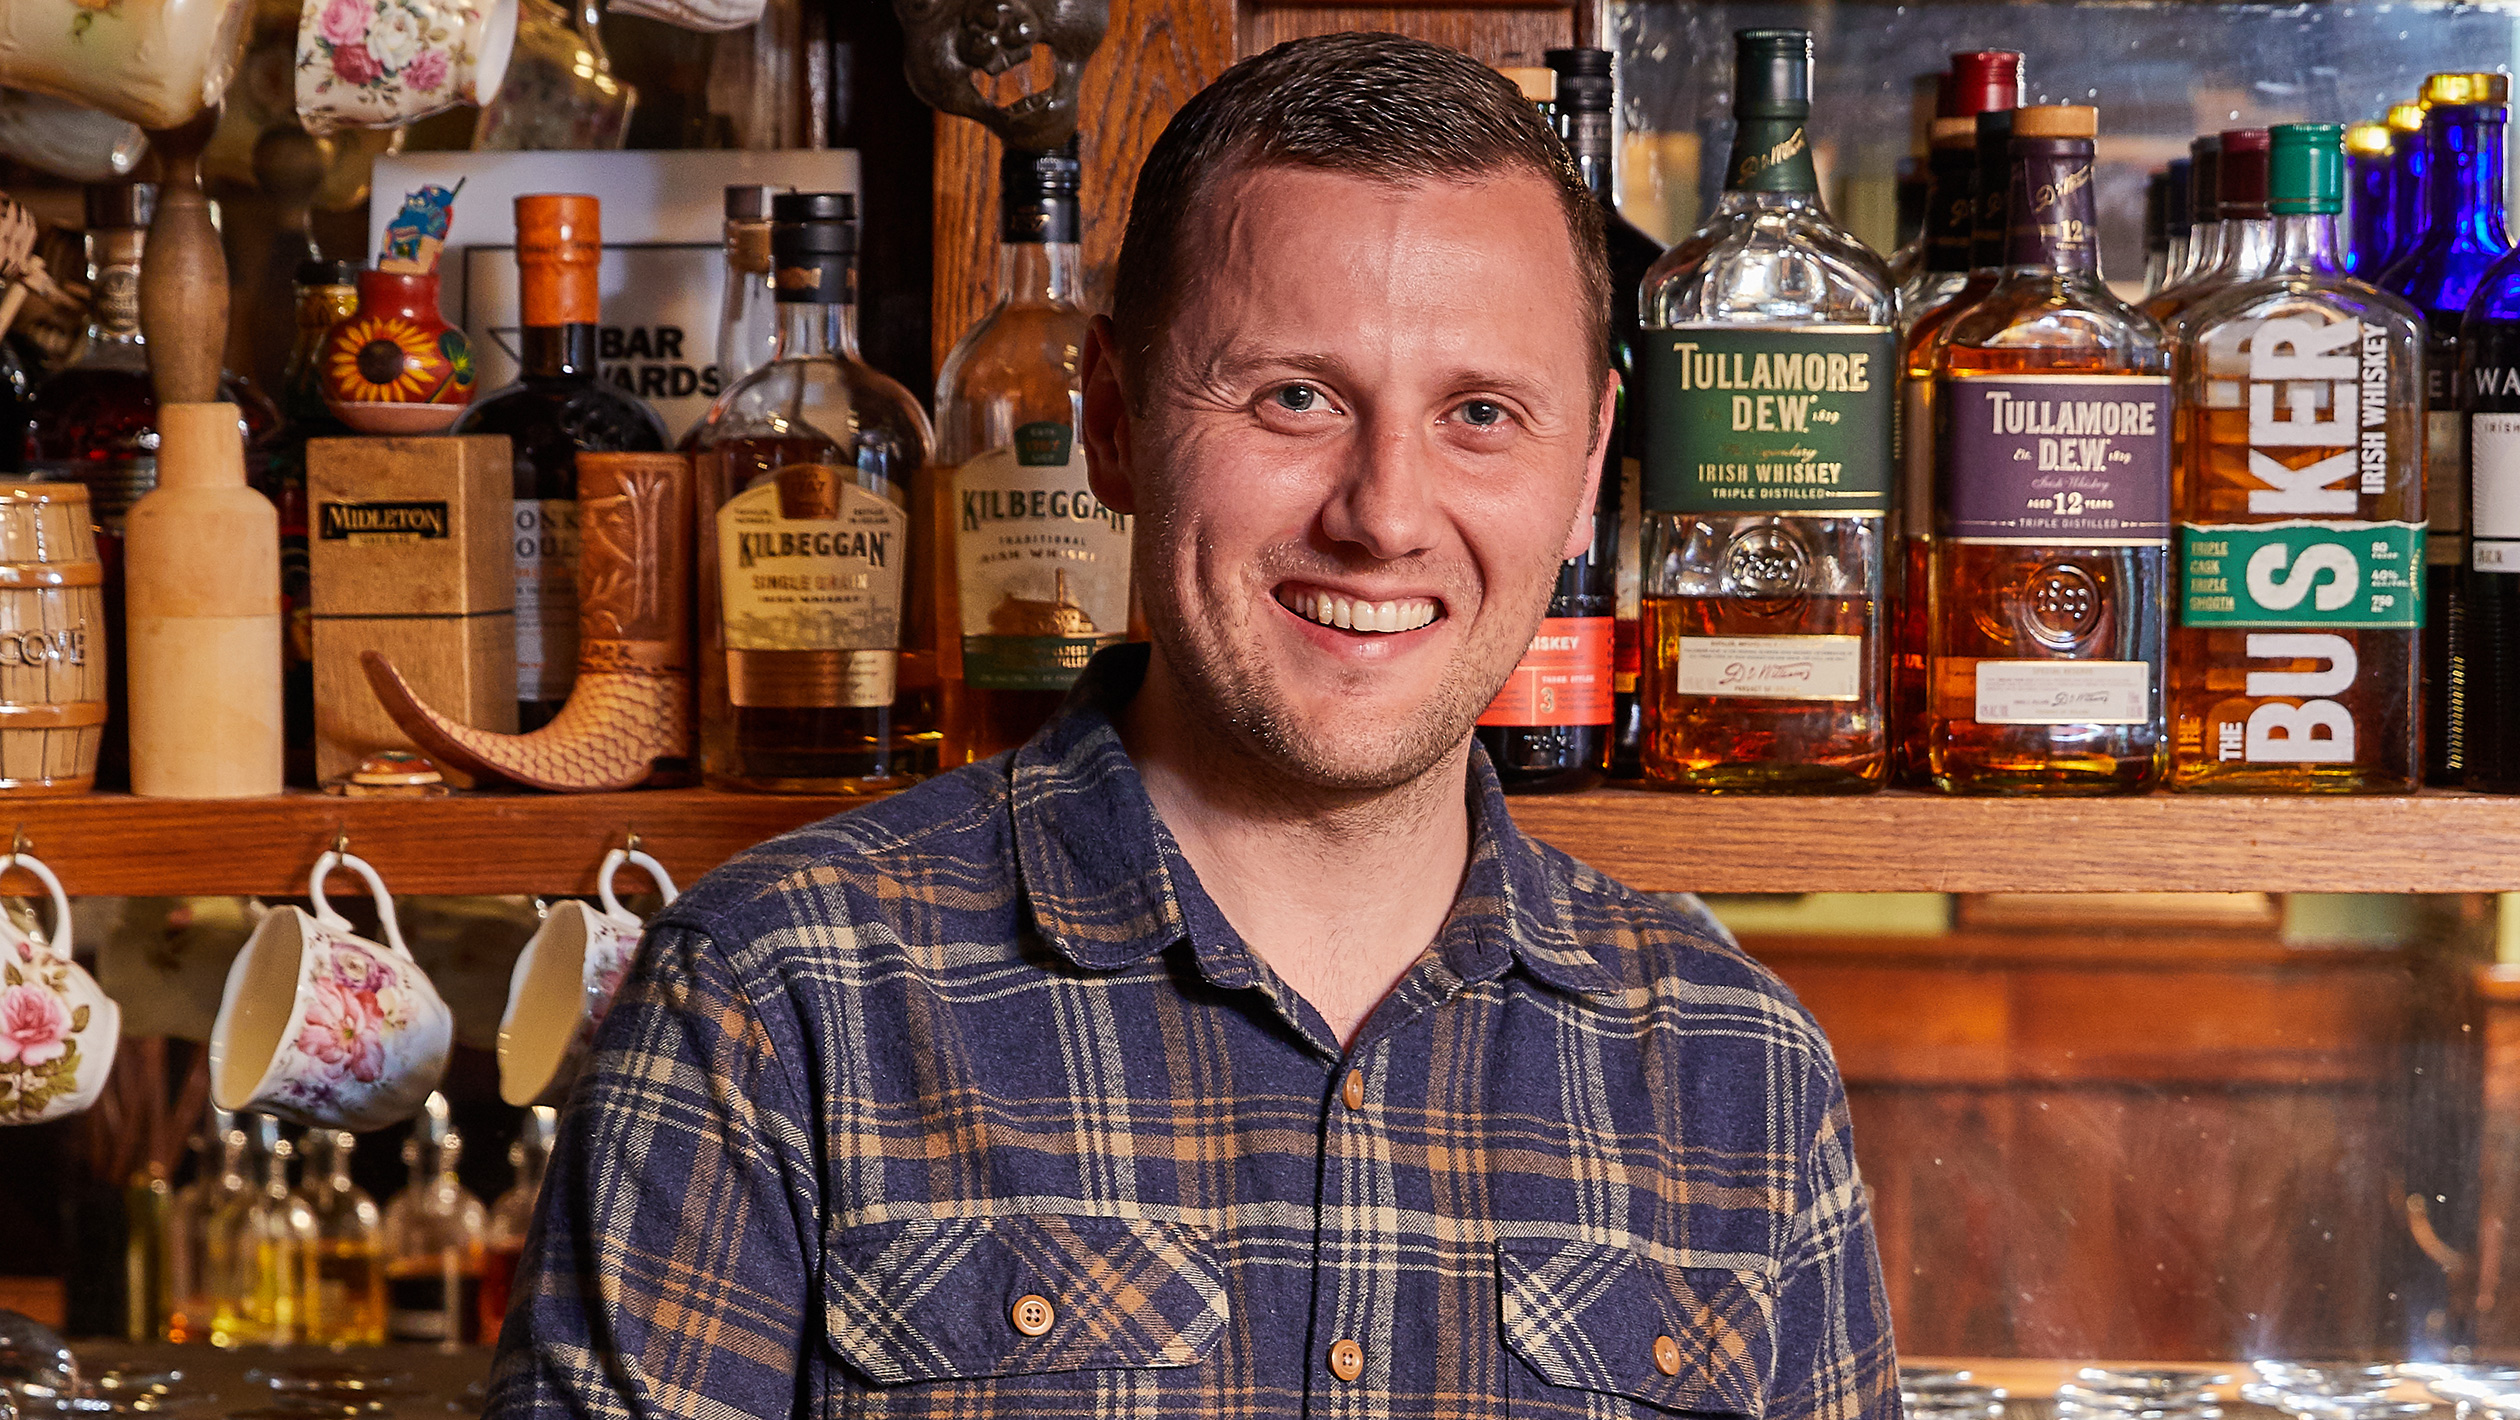 Headshot of Jack McGarry in front of shelves of whisky